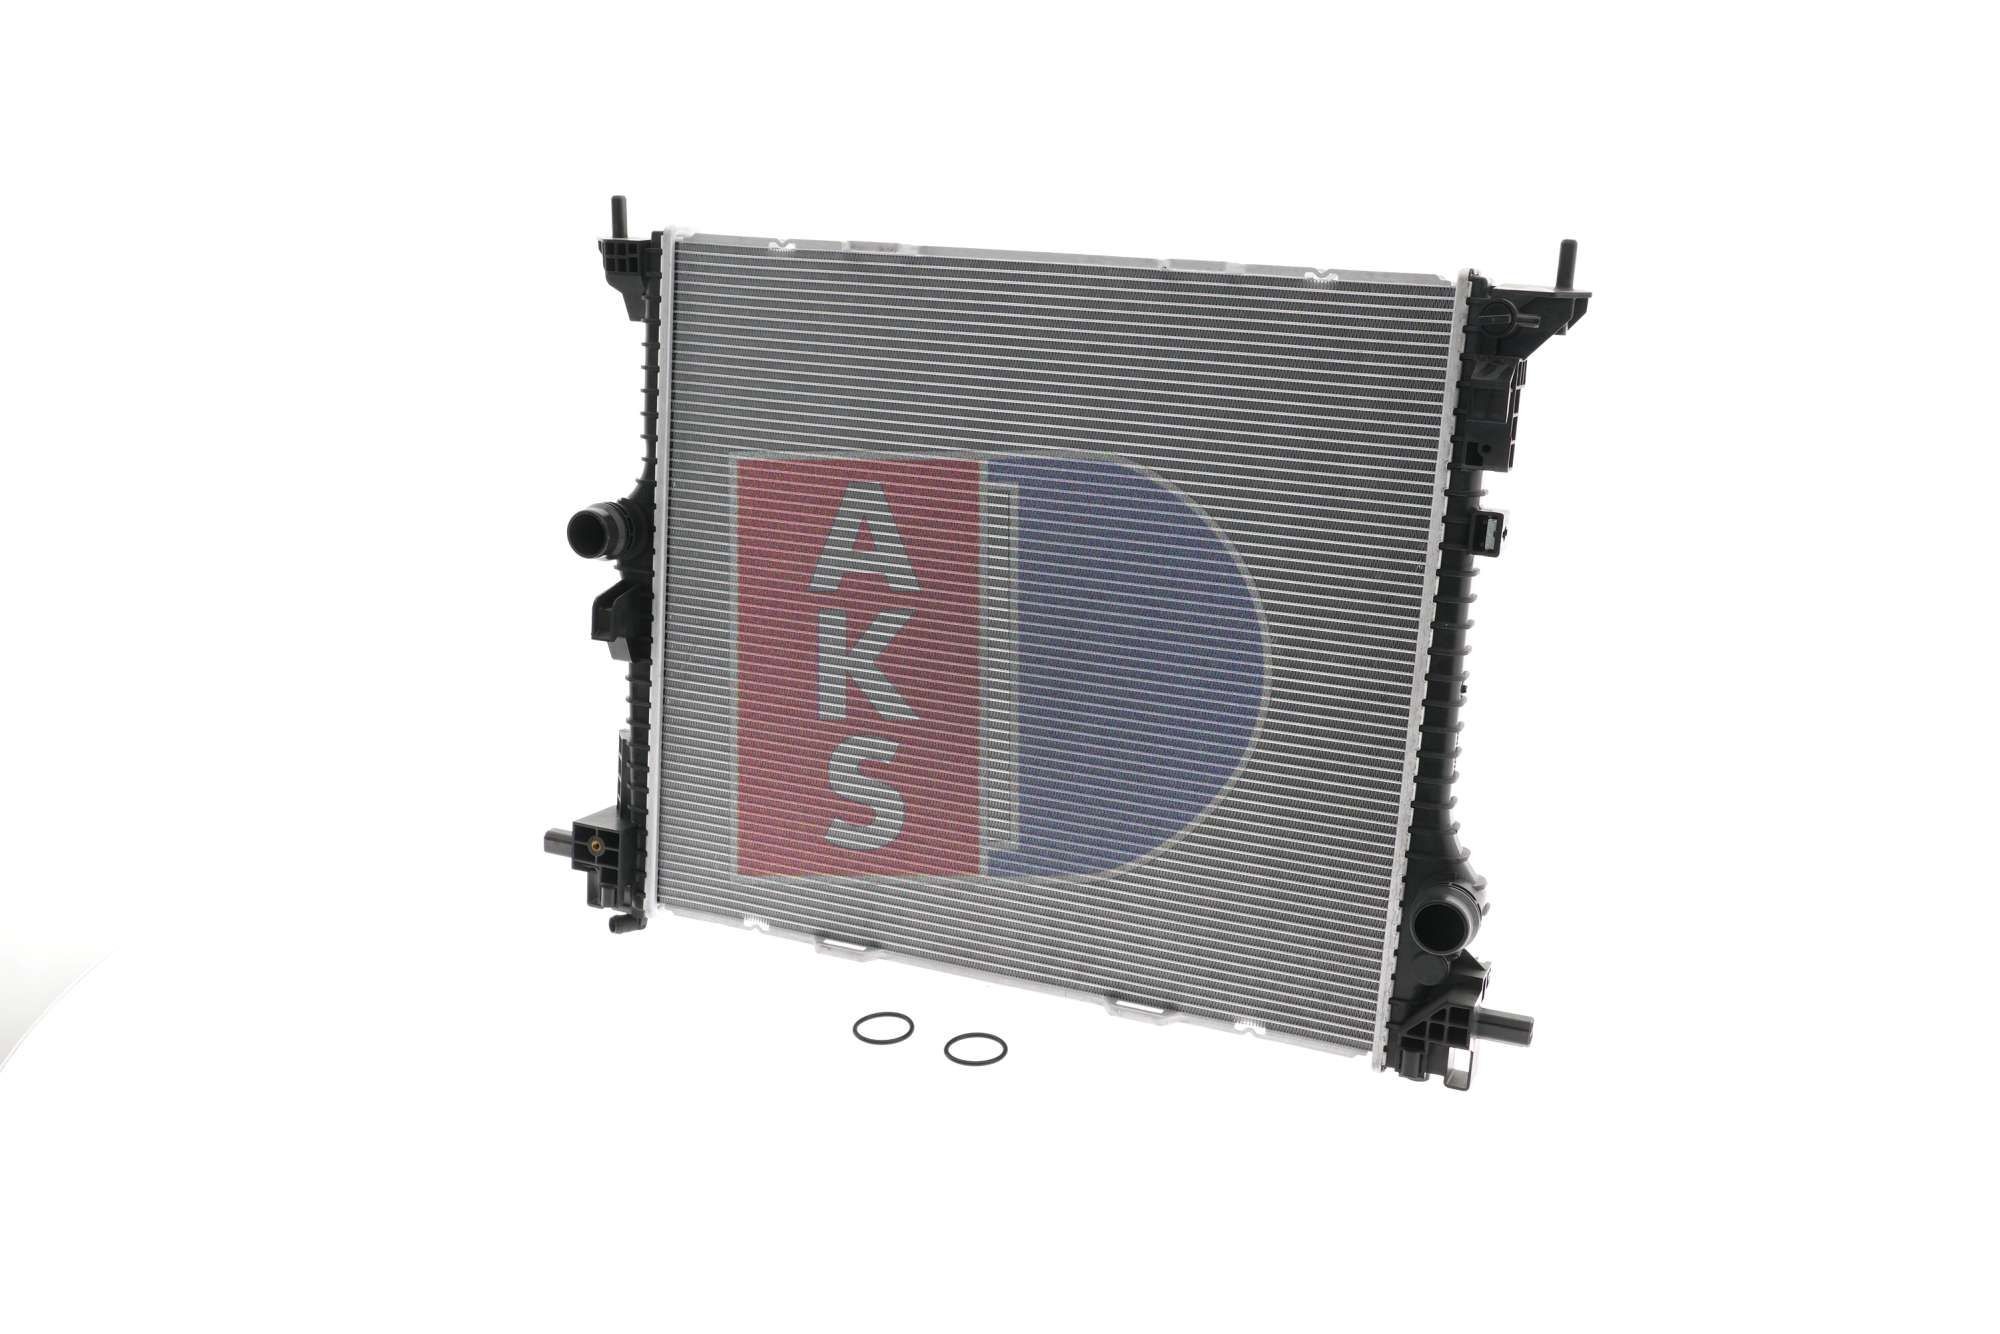 AKS DASIS 010001N Engine radiator for vehicles with/without air conditioning, 580 x 415 x 34 mm, Manual Transmission, Mechanically jointed cooling fins